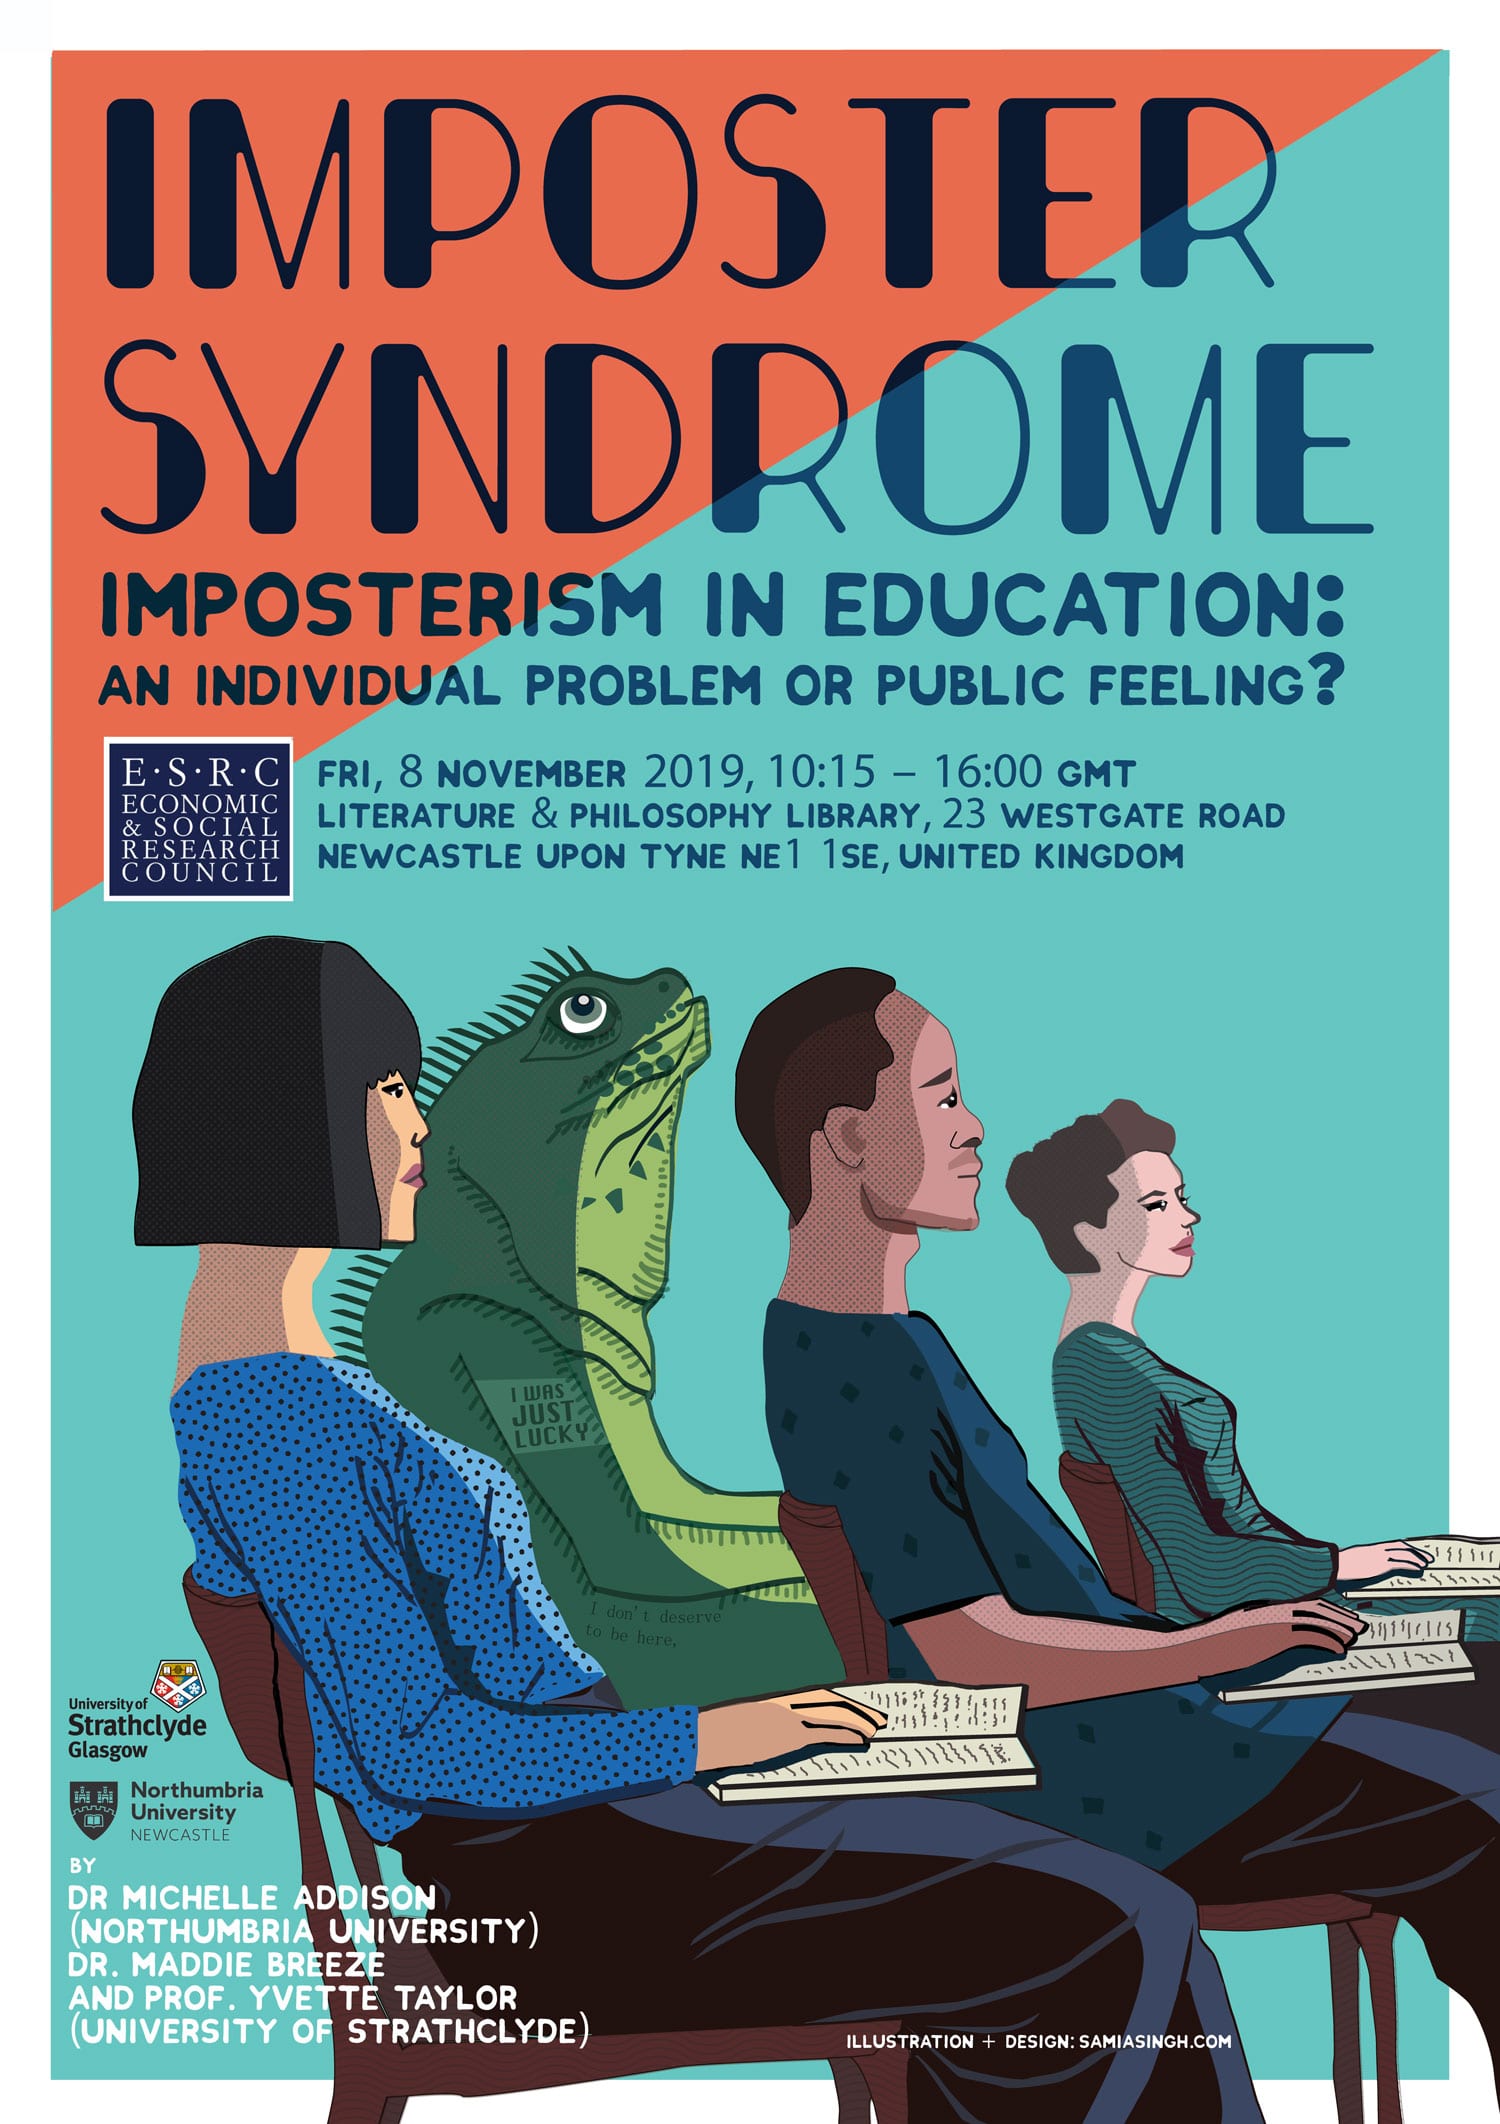 Imposter Syndrome.
Have you ever felt this way?
Poster for a research event on Imposterism in Education.